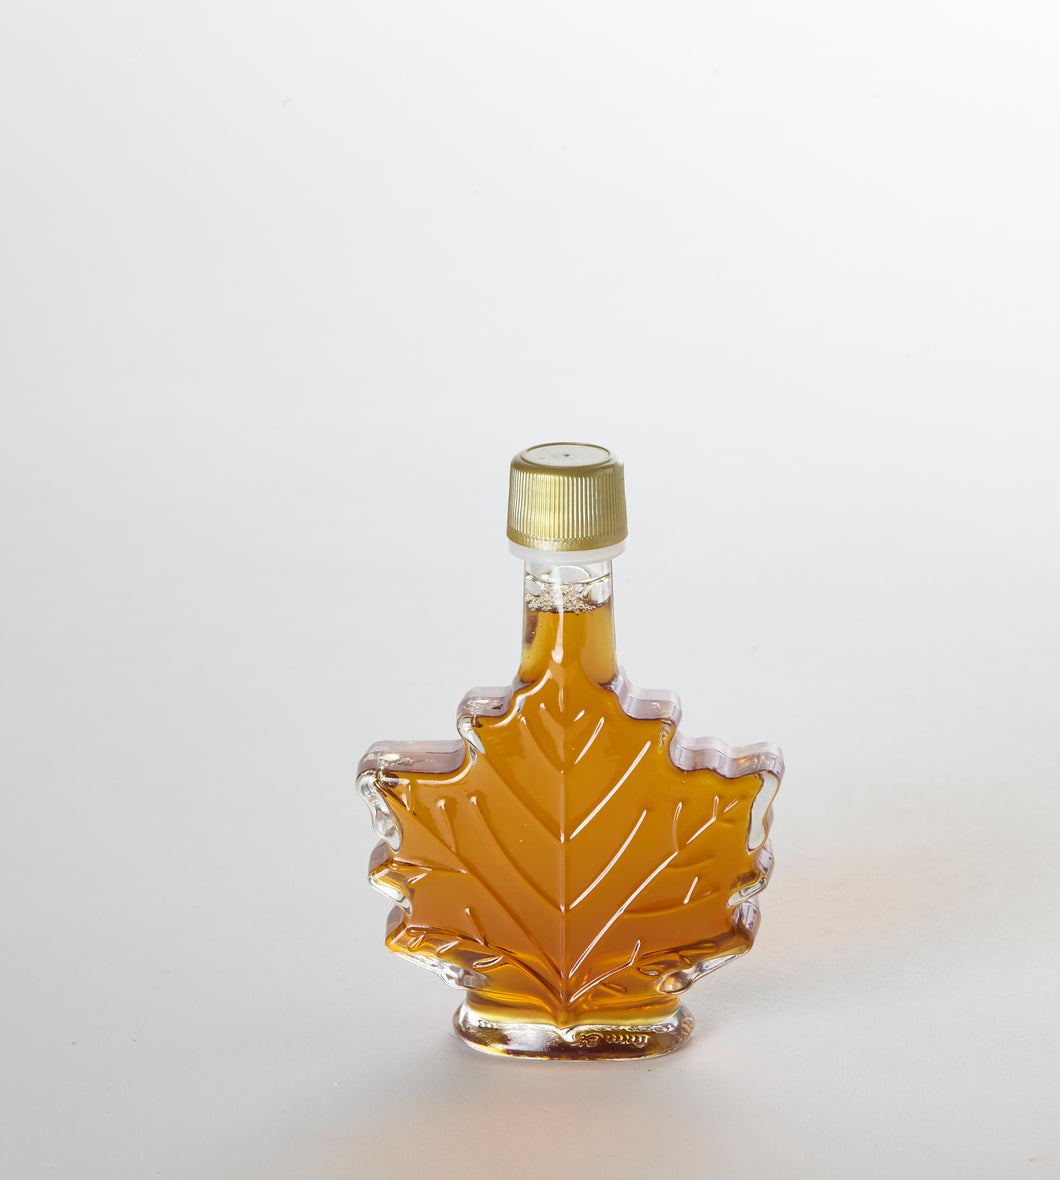 Glass Maple Leaf New York State Pure Maple Syrup